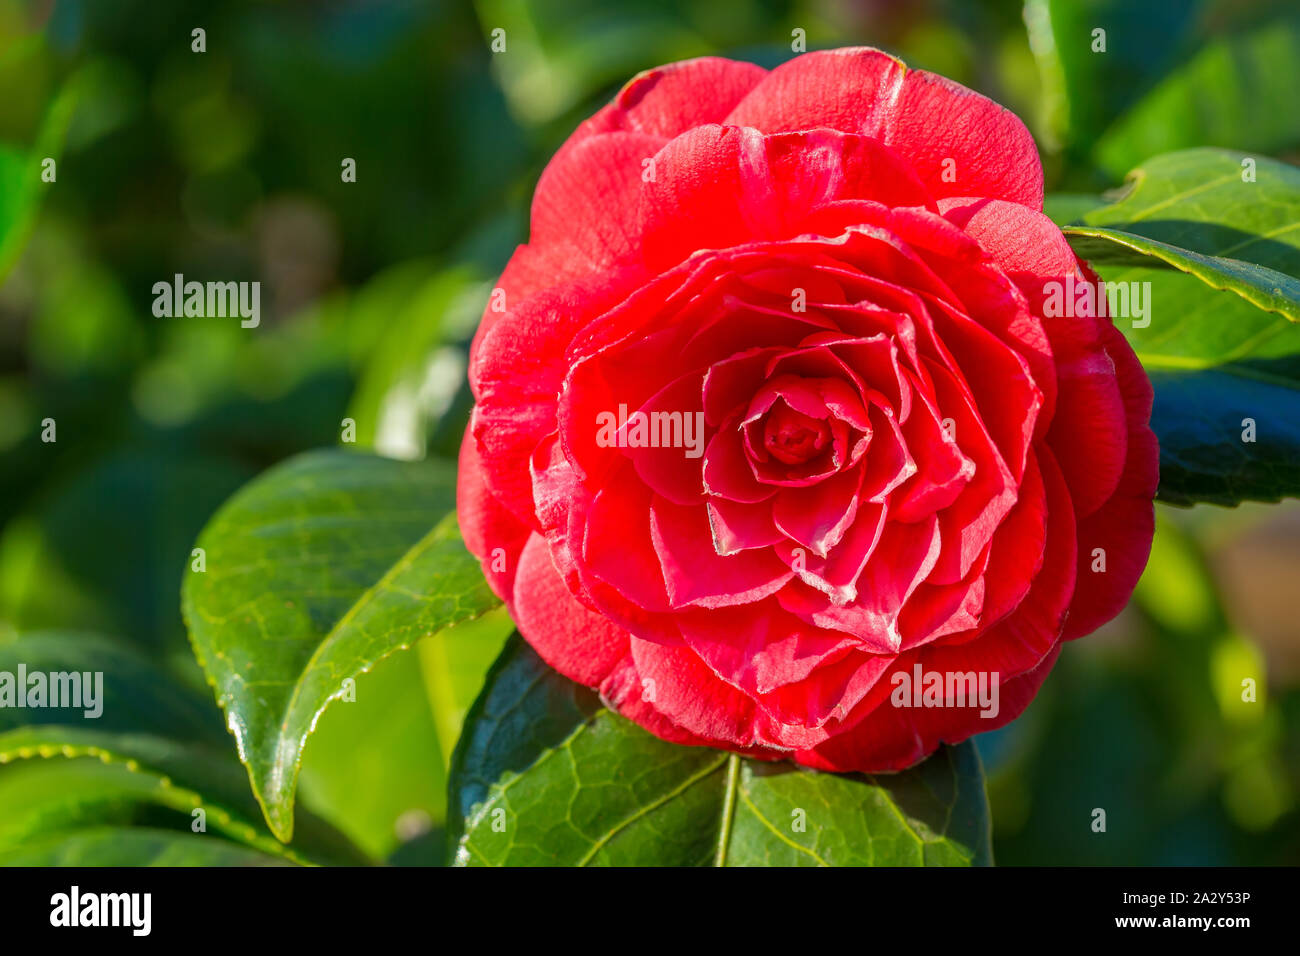 Macro photo of flowering red Camellia japonica flower at plant Stock Photo